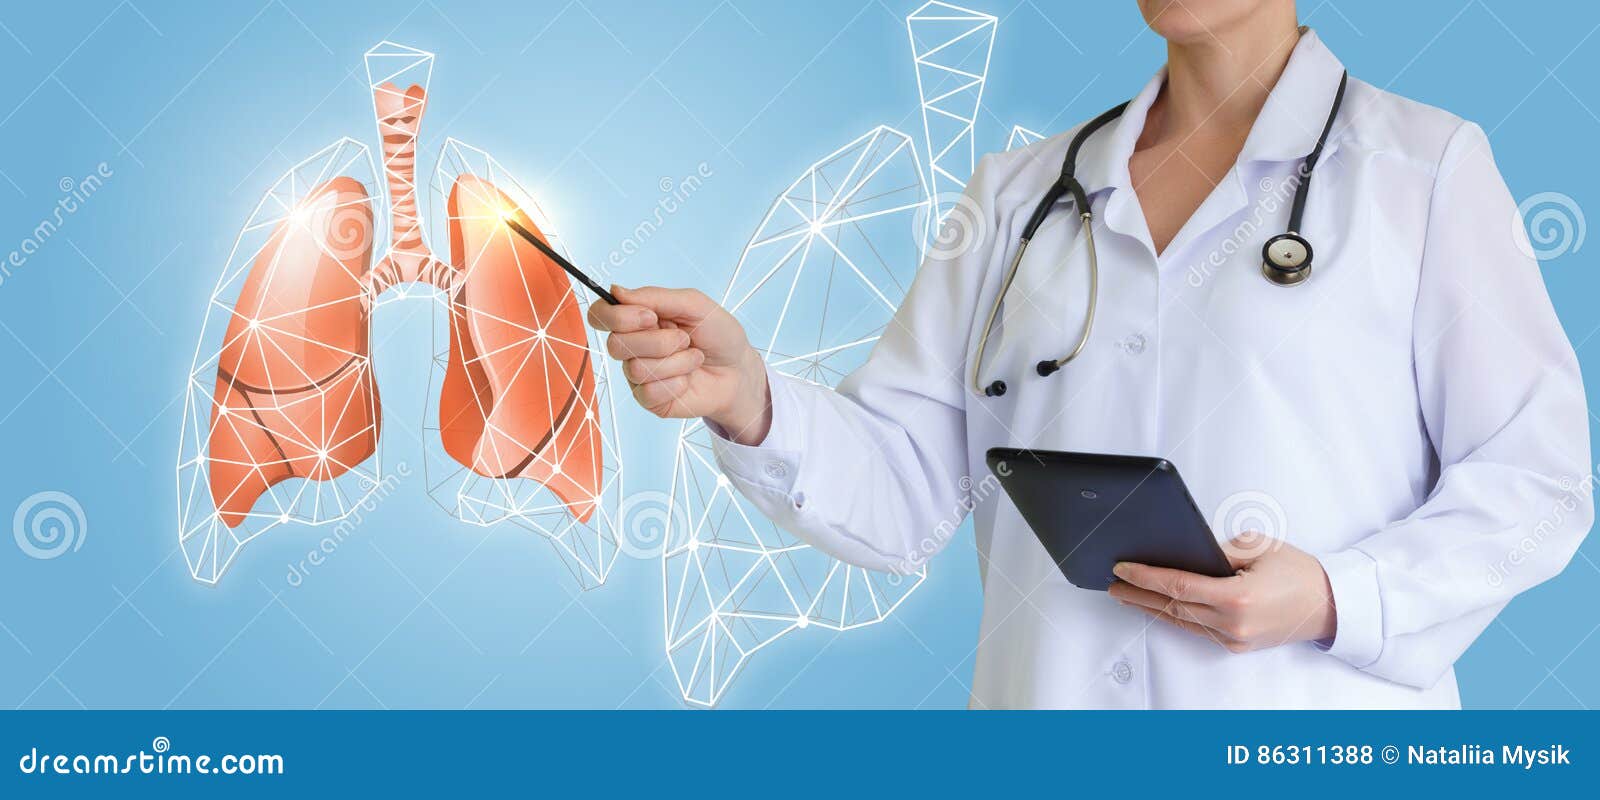 doctor shows an interactive picture lungs.